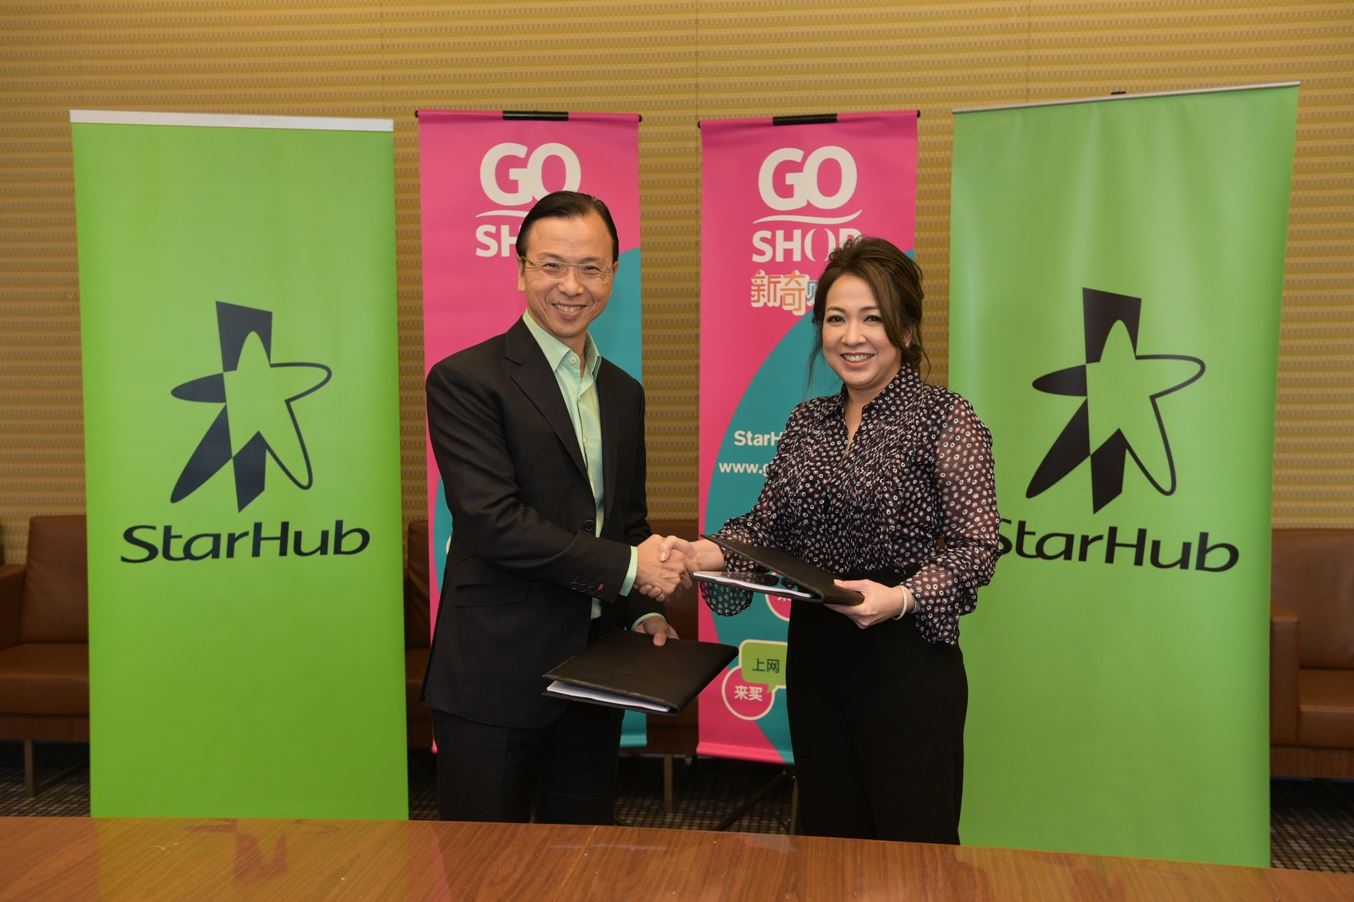 Astro Partners Starhub to Offer Go Shop. From Left - Tan Tong Hai, CEO, Starhub and Dato’ Rohana Rozhan, Group CEO of Astro